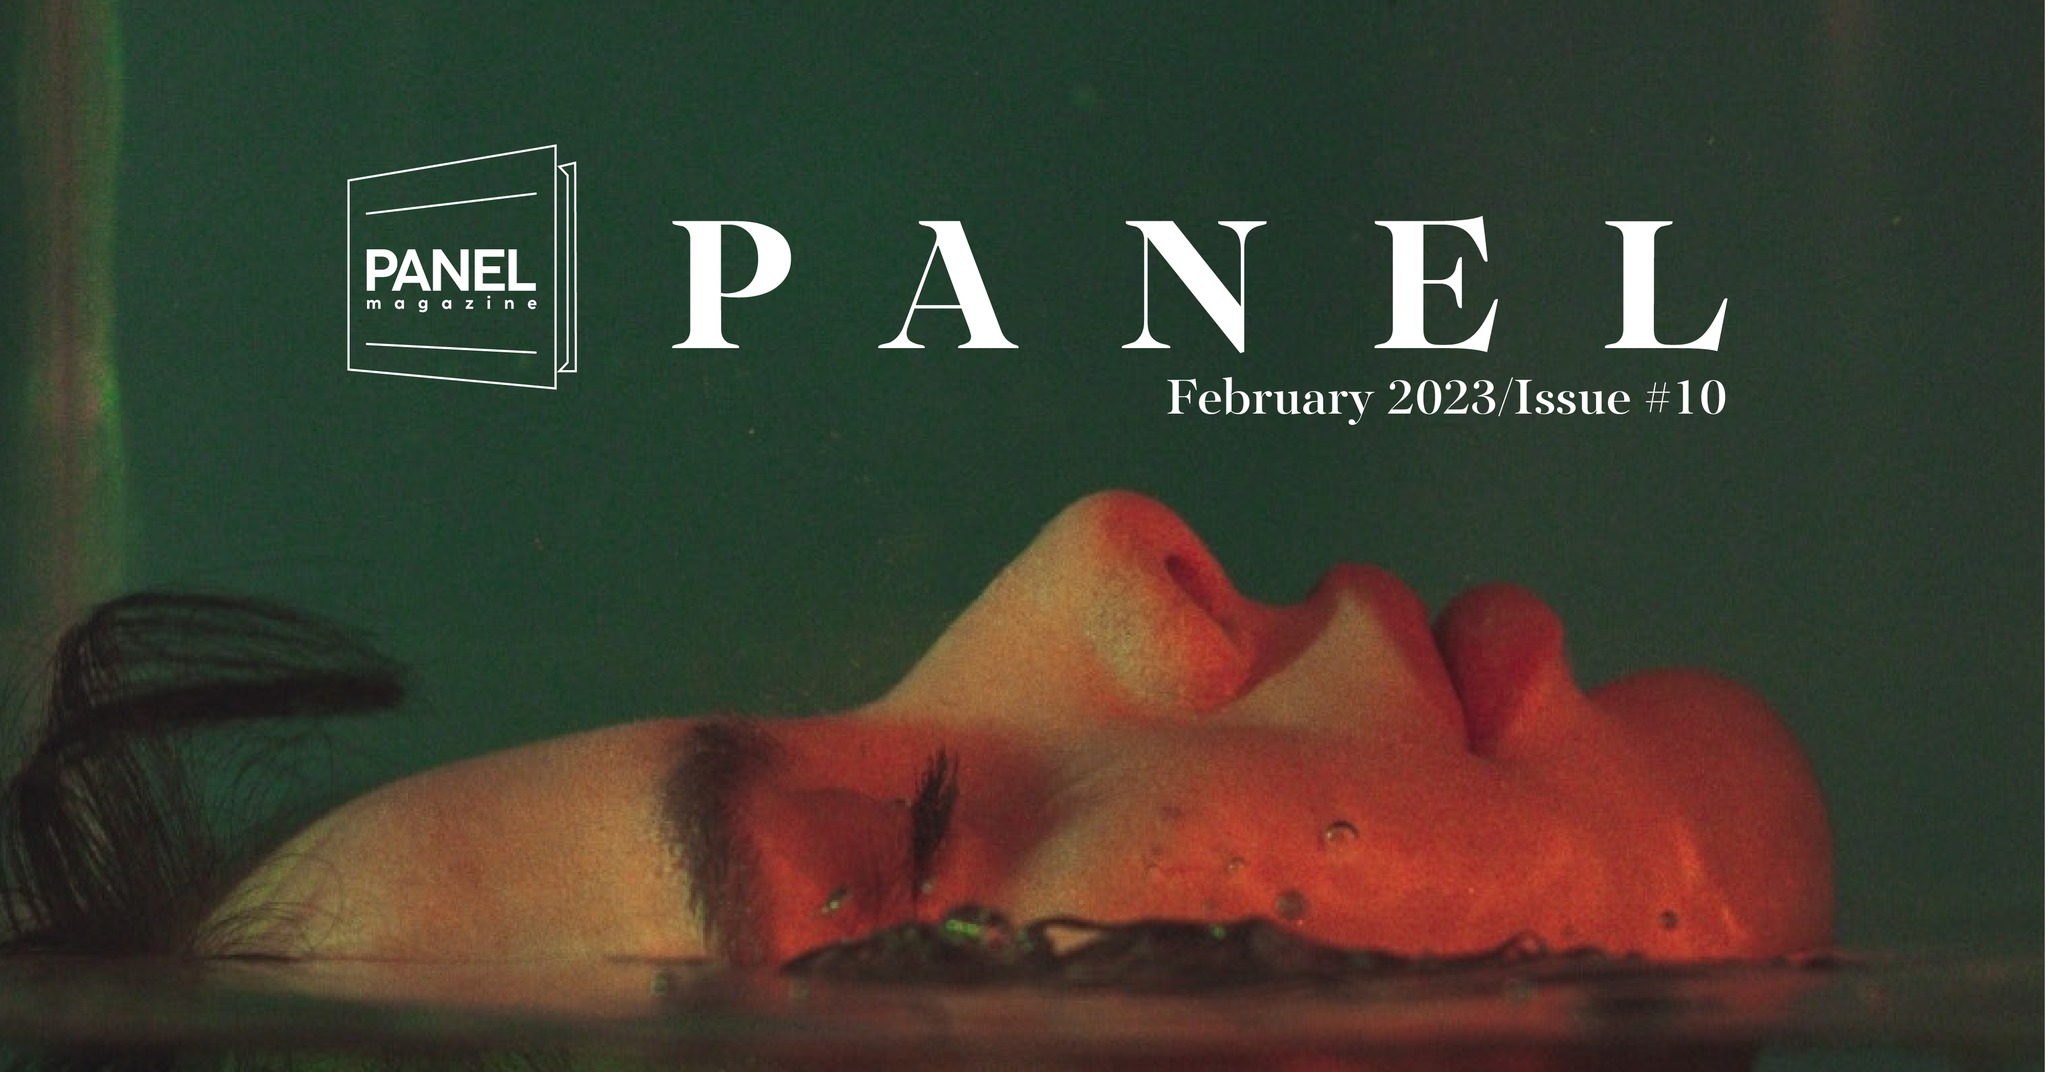 Panel's 10th Issue Launch & Anniversary Party, Massolit Books & Café Budapest, 3 March